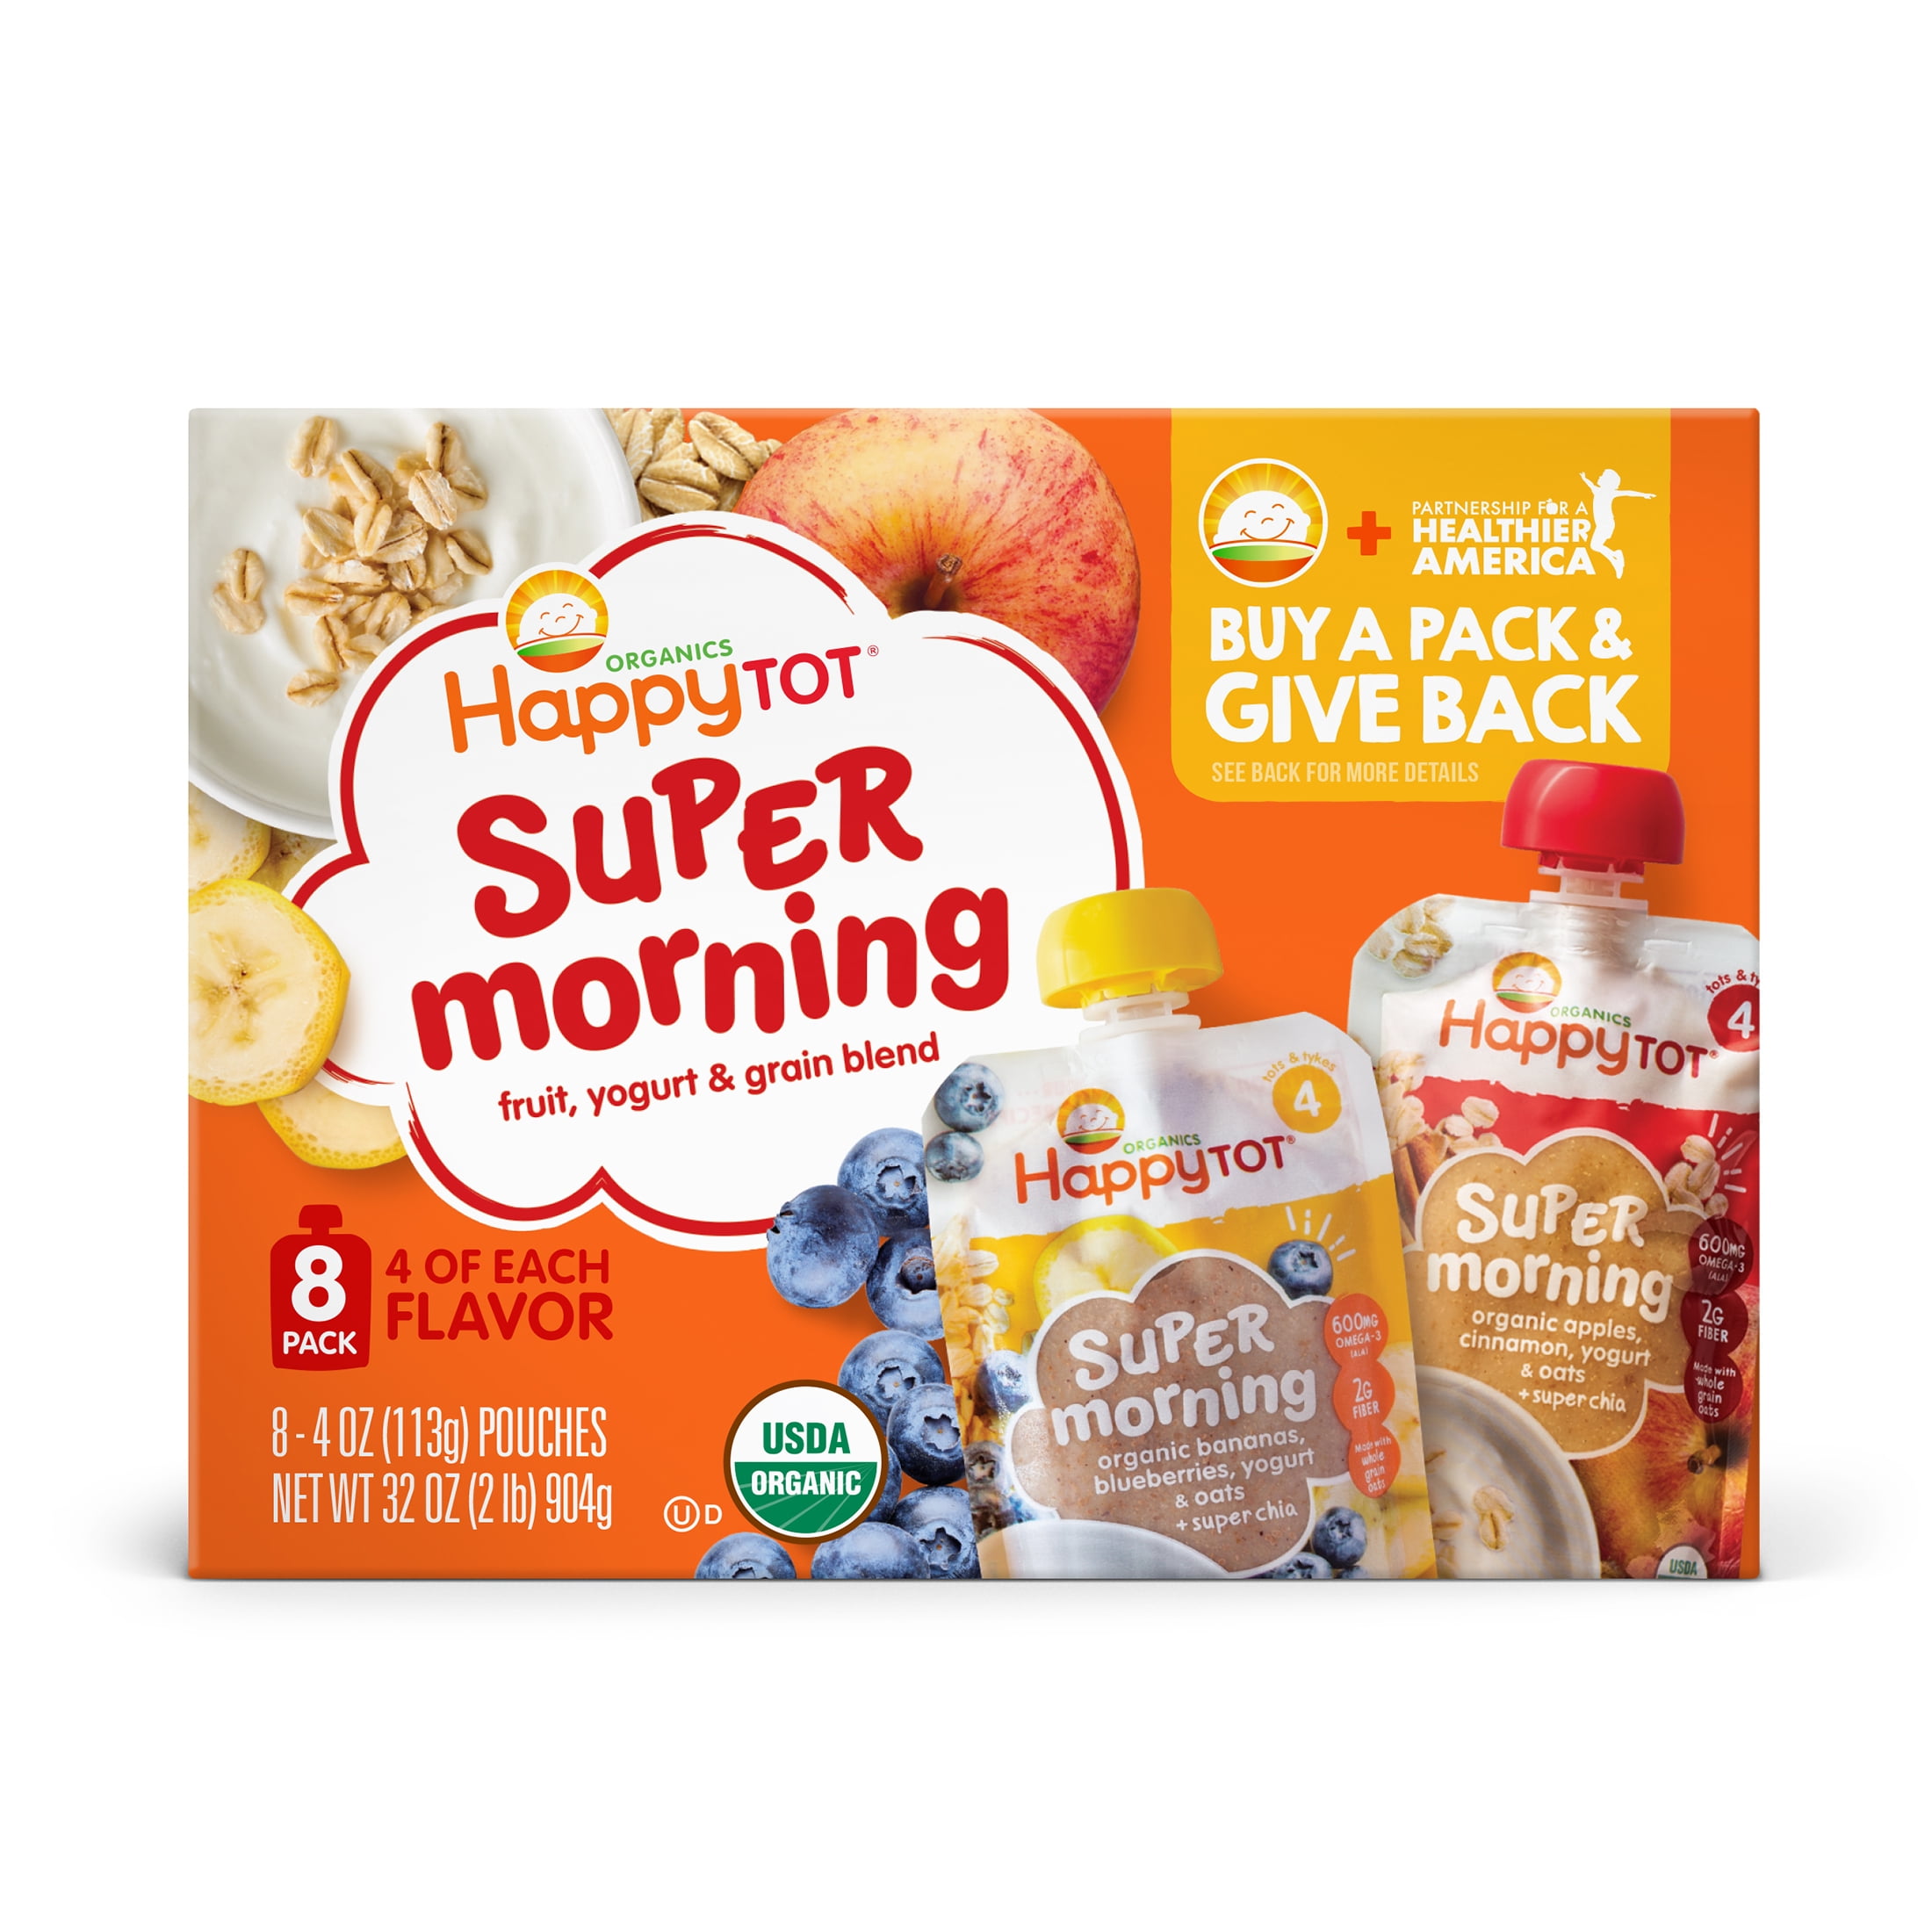 (8 Pouches) Happy Tot Organics Super Morning Give Back Pack Toddler Food, Stage 4, Organic Bananas, Blueberries, Yogurt, Oats & Chia, Organic Apples, Cinnamon, Yogurt, Oats & Chia, 4 oz Pouches